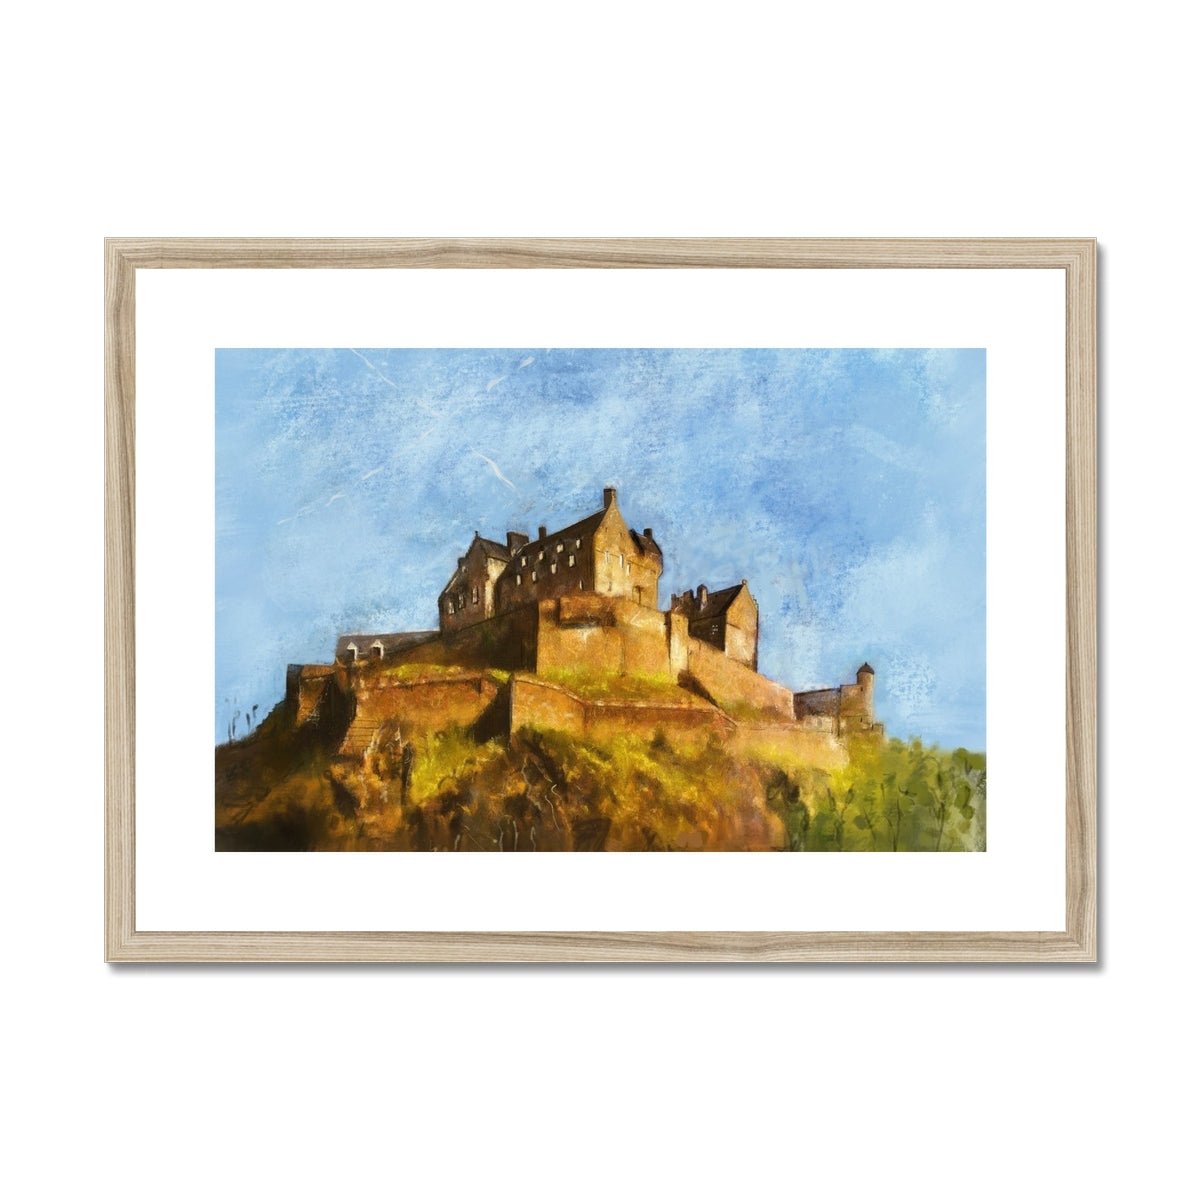 Edinburgh Castle Painting | Framed & Mounted Prints From Scotland-Framed & Mounted Prints-Historic & Iconic Scotland Art Gallery-A2 Landscape-Natural Frame-Paintings, Prints, Homeware, Art Gifts From Scotland By Scottish Artist Kevin Hunter